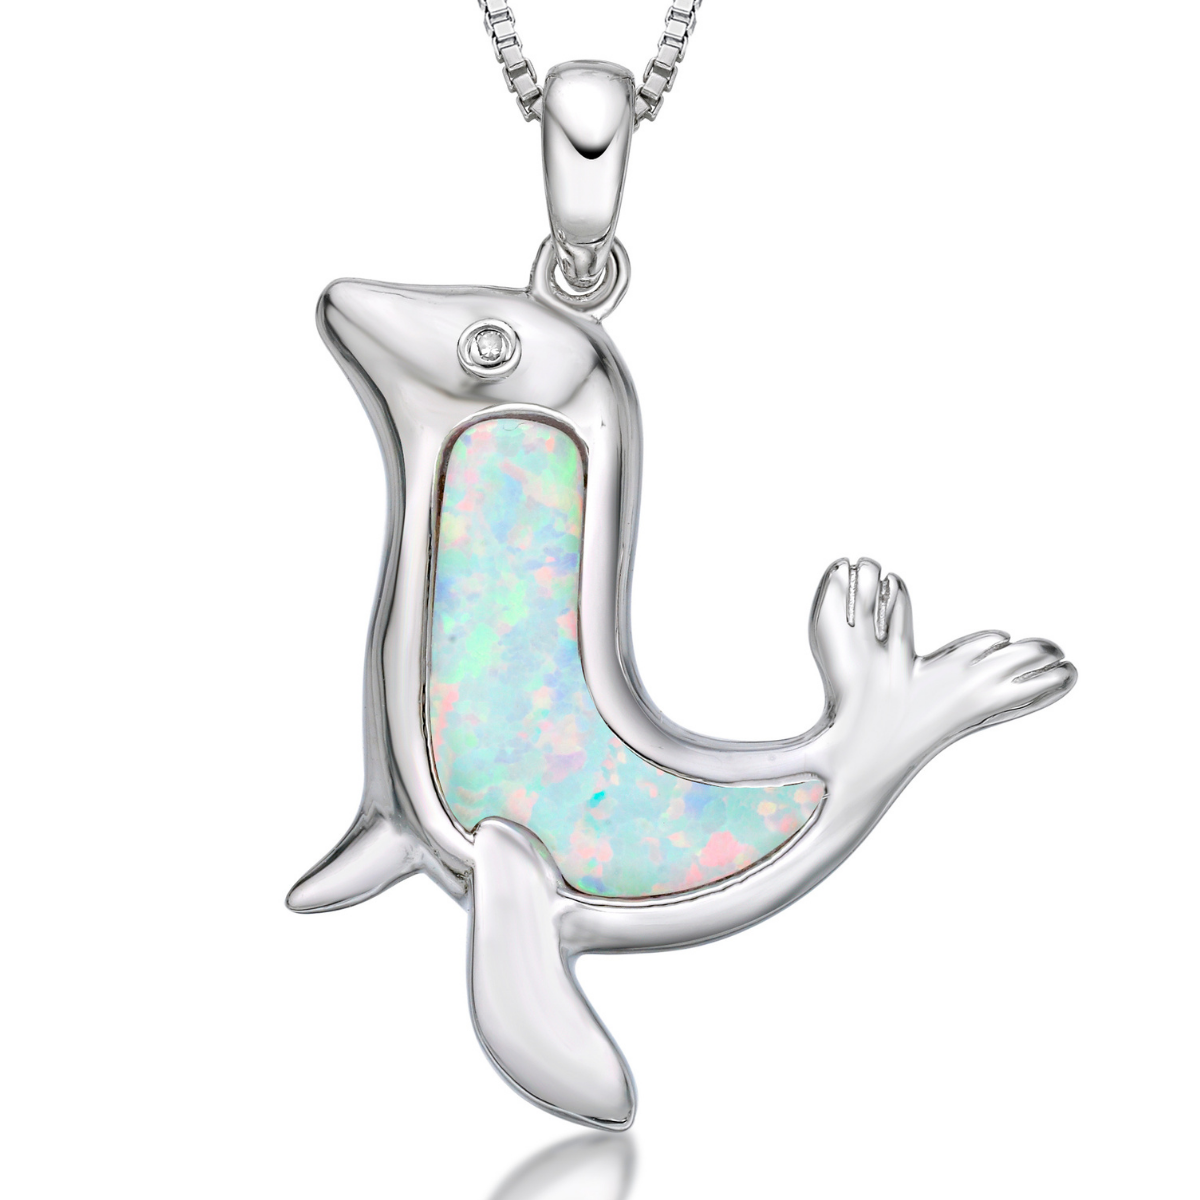 Lavari Jewelers Women's Created White Opal Sea Lion Diamond Pendant with Lobster Clasp, Sterling Silver, .015 Cttw, 18 Inch Cable Chain